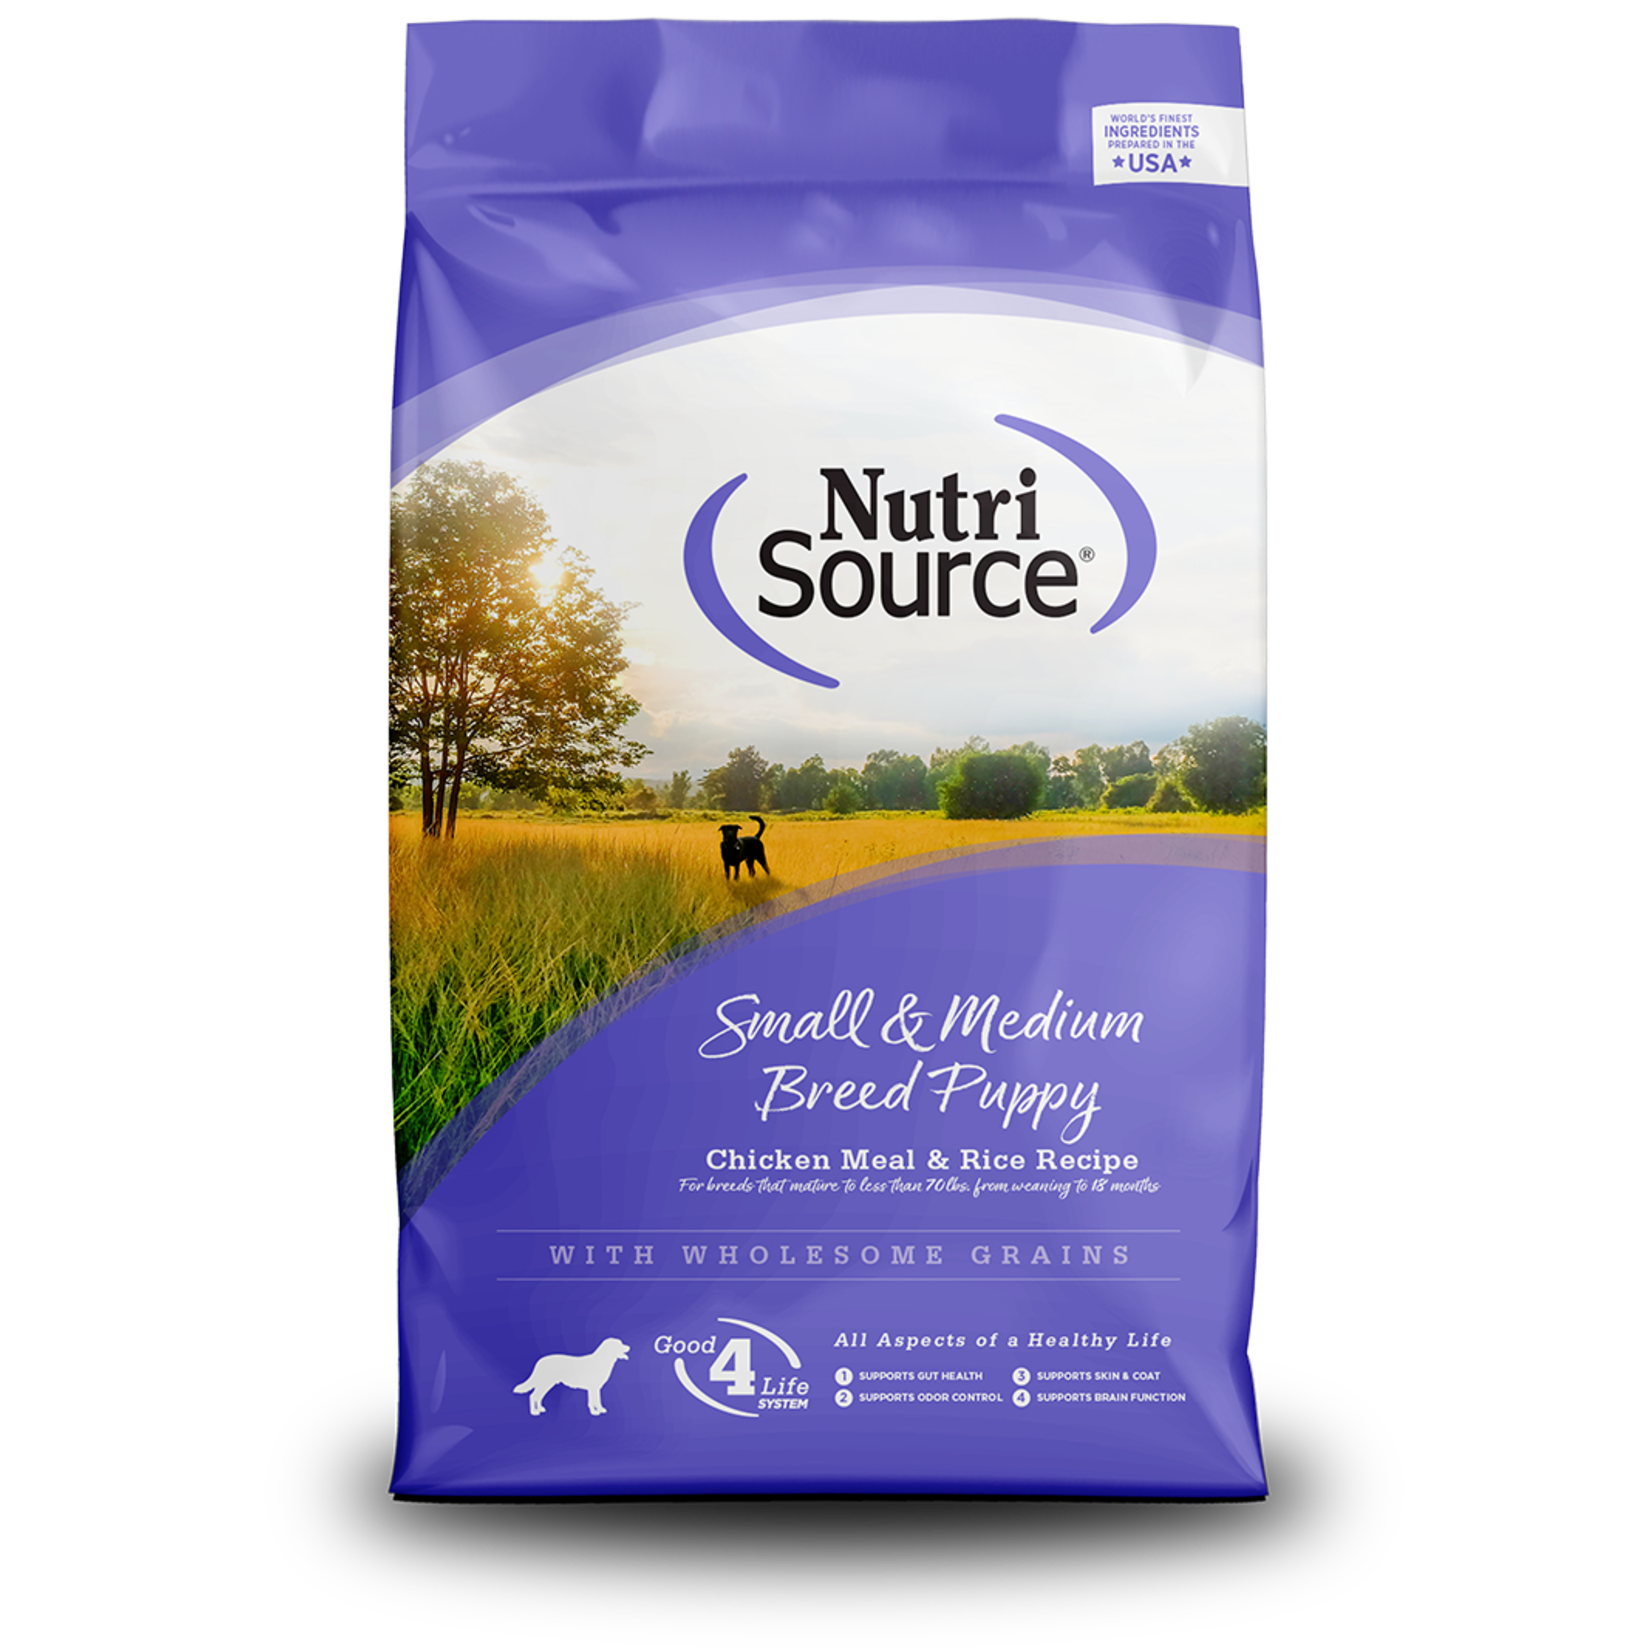 NutriSource NutriSource Small & Medium Breed Puppy Chicken & Rice Recipe for Dogs